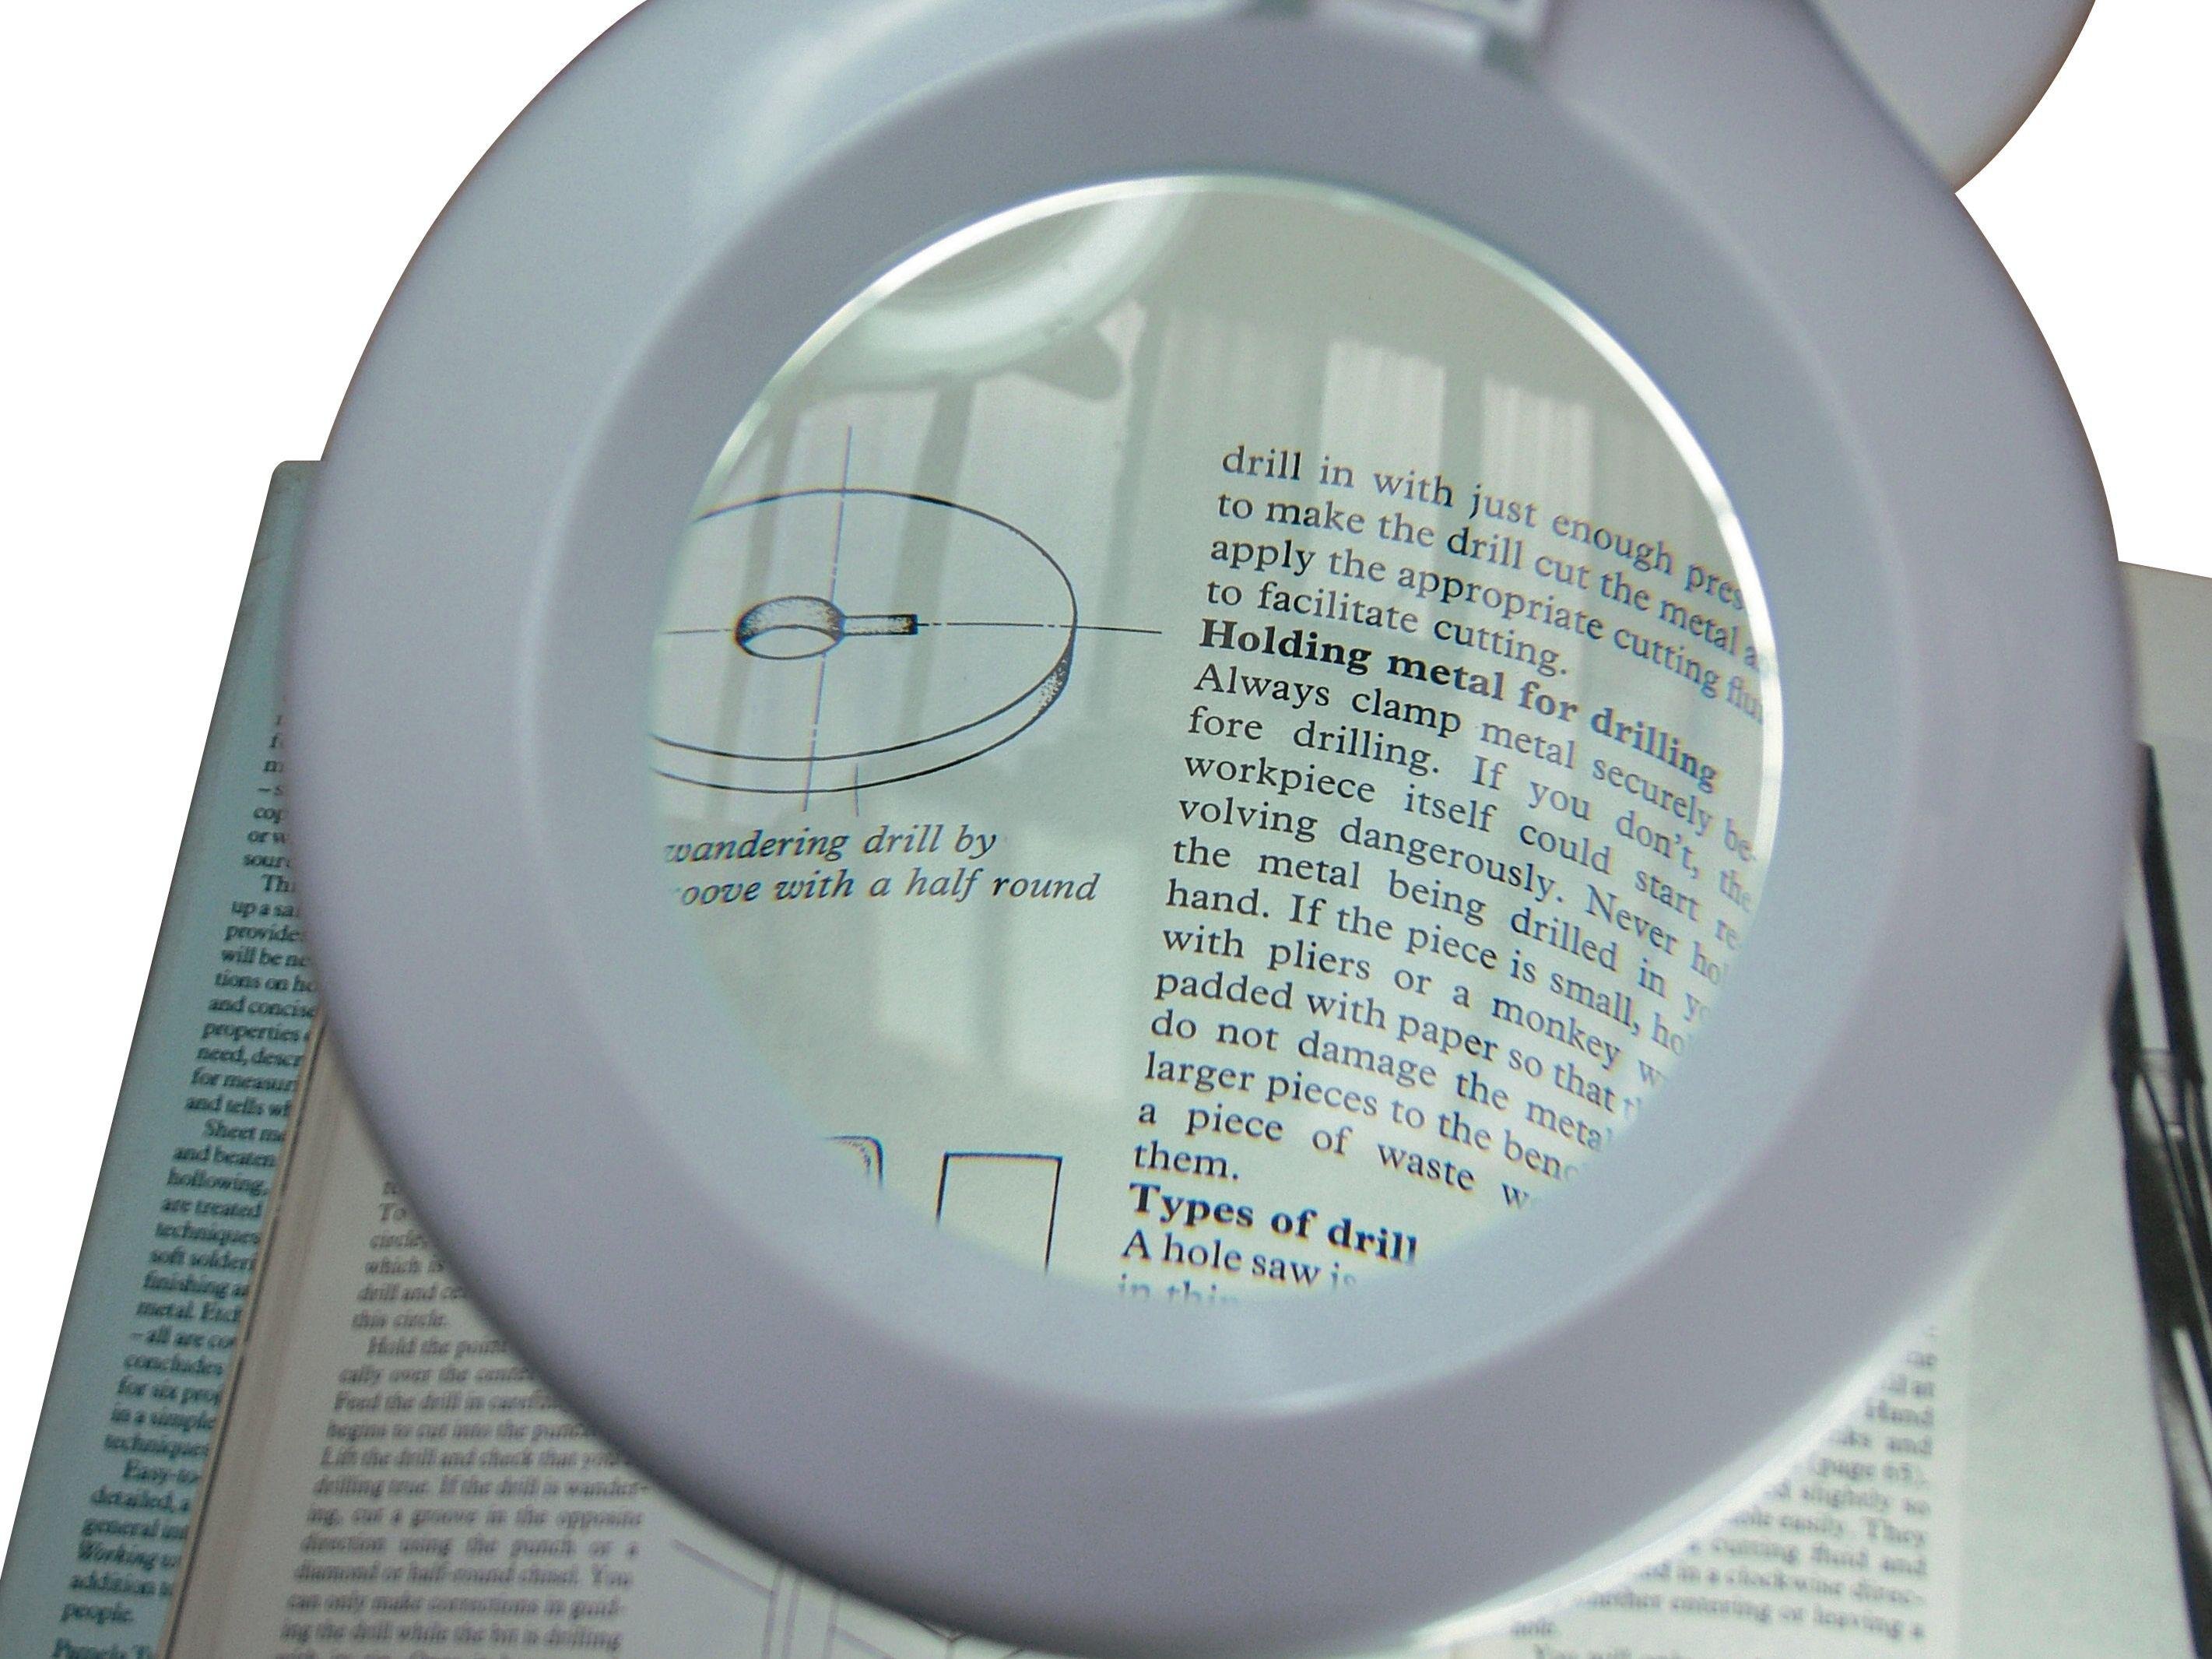 LightCraft - Compact Craft Lamp and Magnifier Review